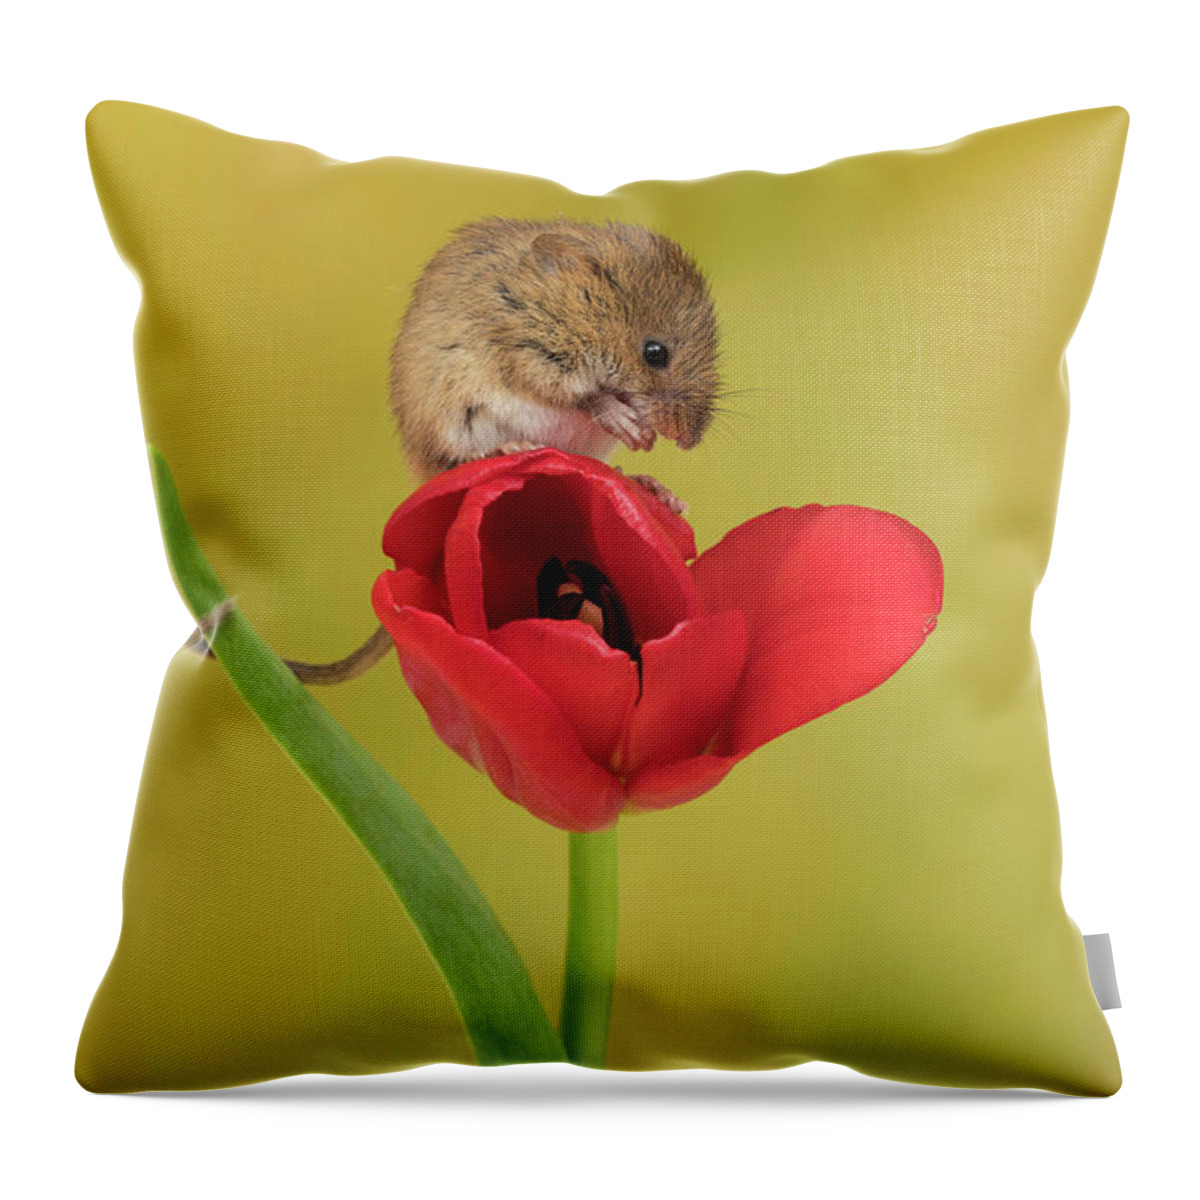 Harvest Throw Pillow featuring the photograph Harvest Mouse_0833 by Miles Herbert